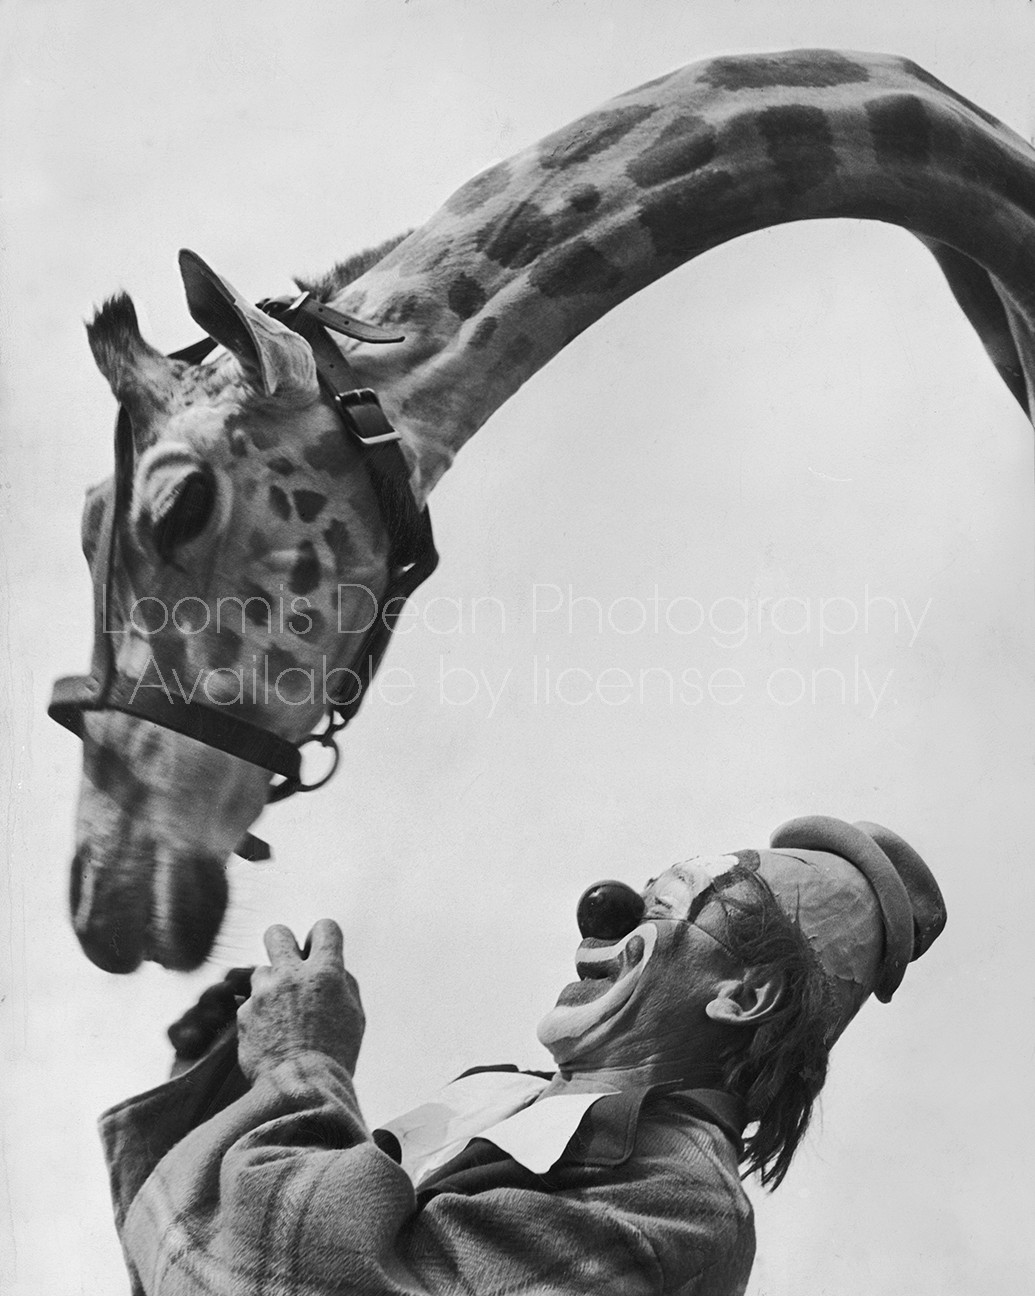 Ringling Brothers clown Lou Jacobs with giraffe.